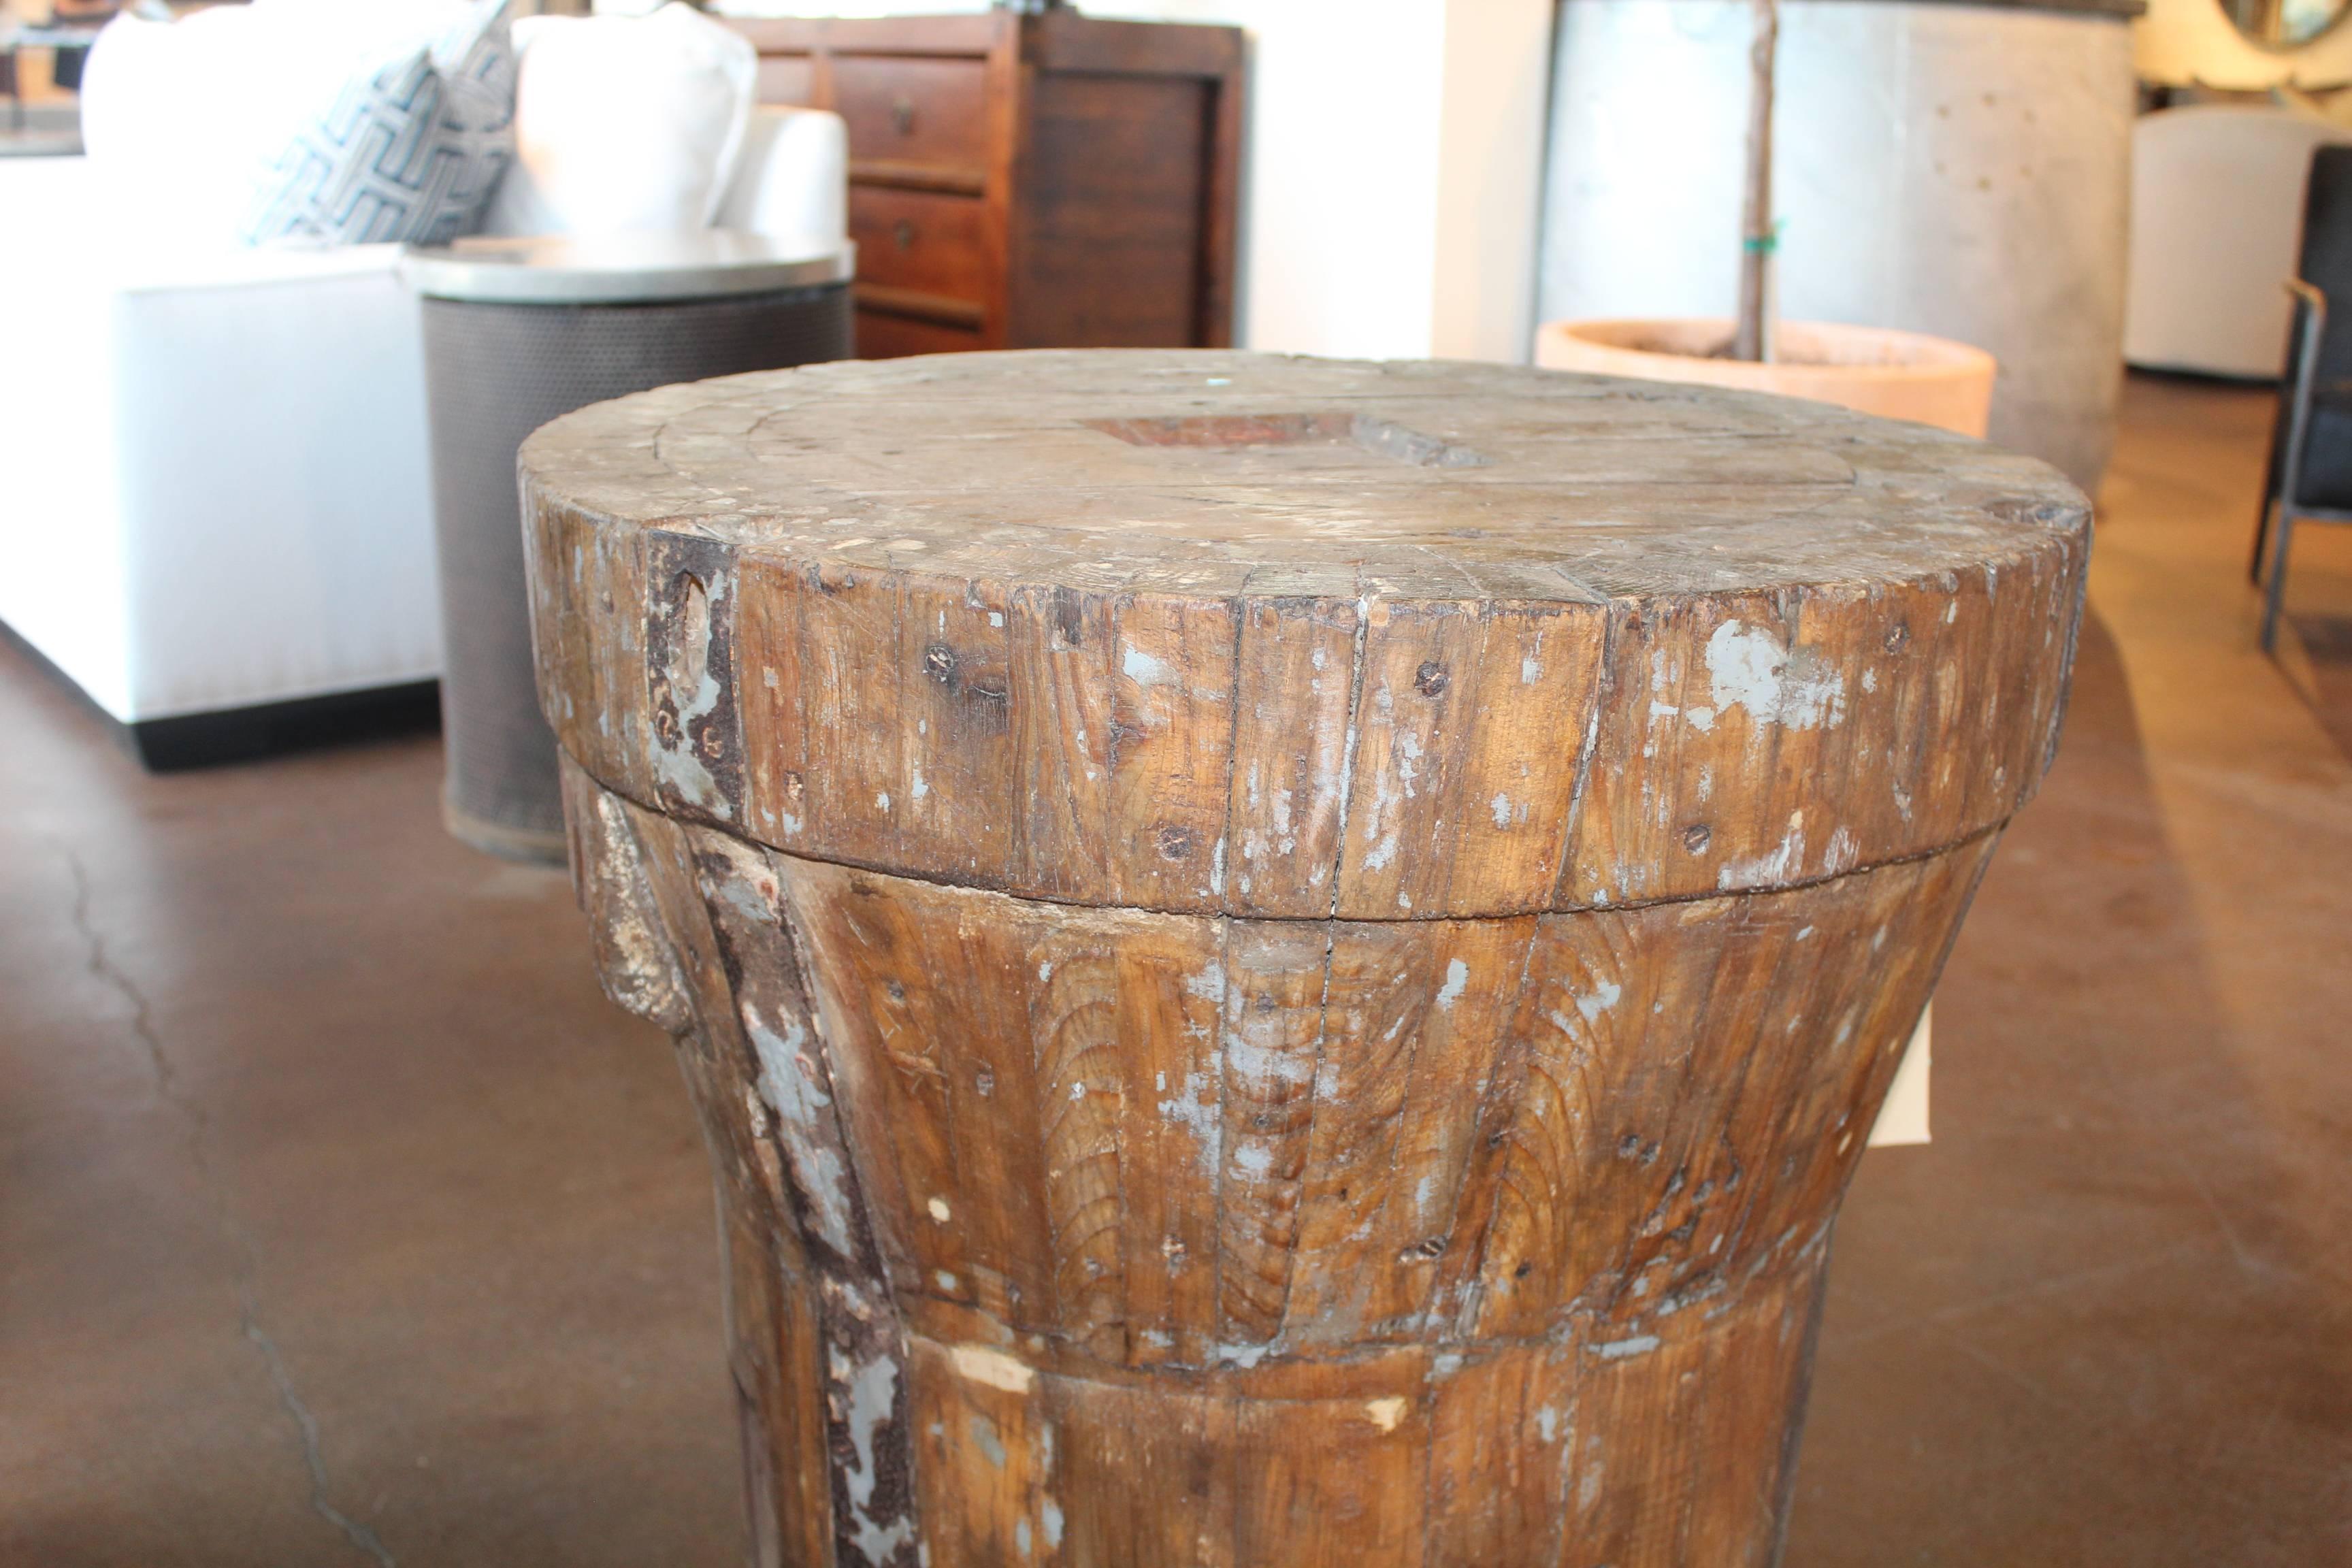 Vintage French industry element as side table or table in a wine room.
       